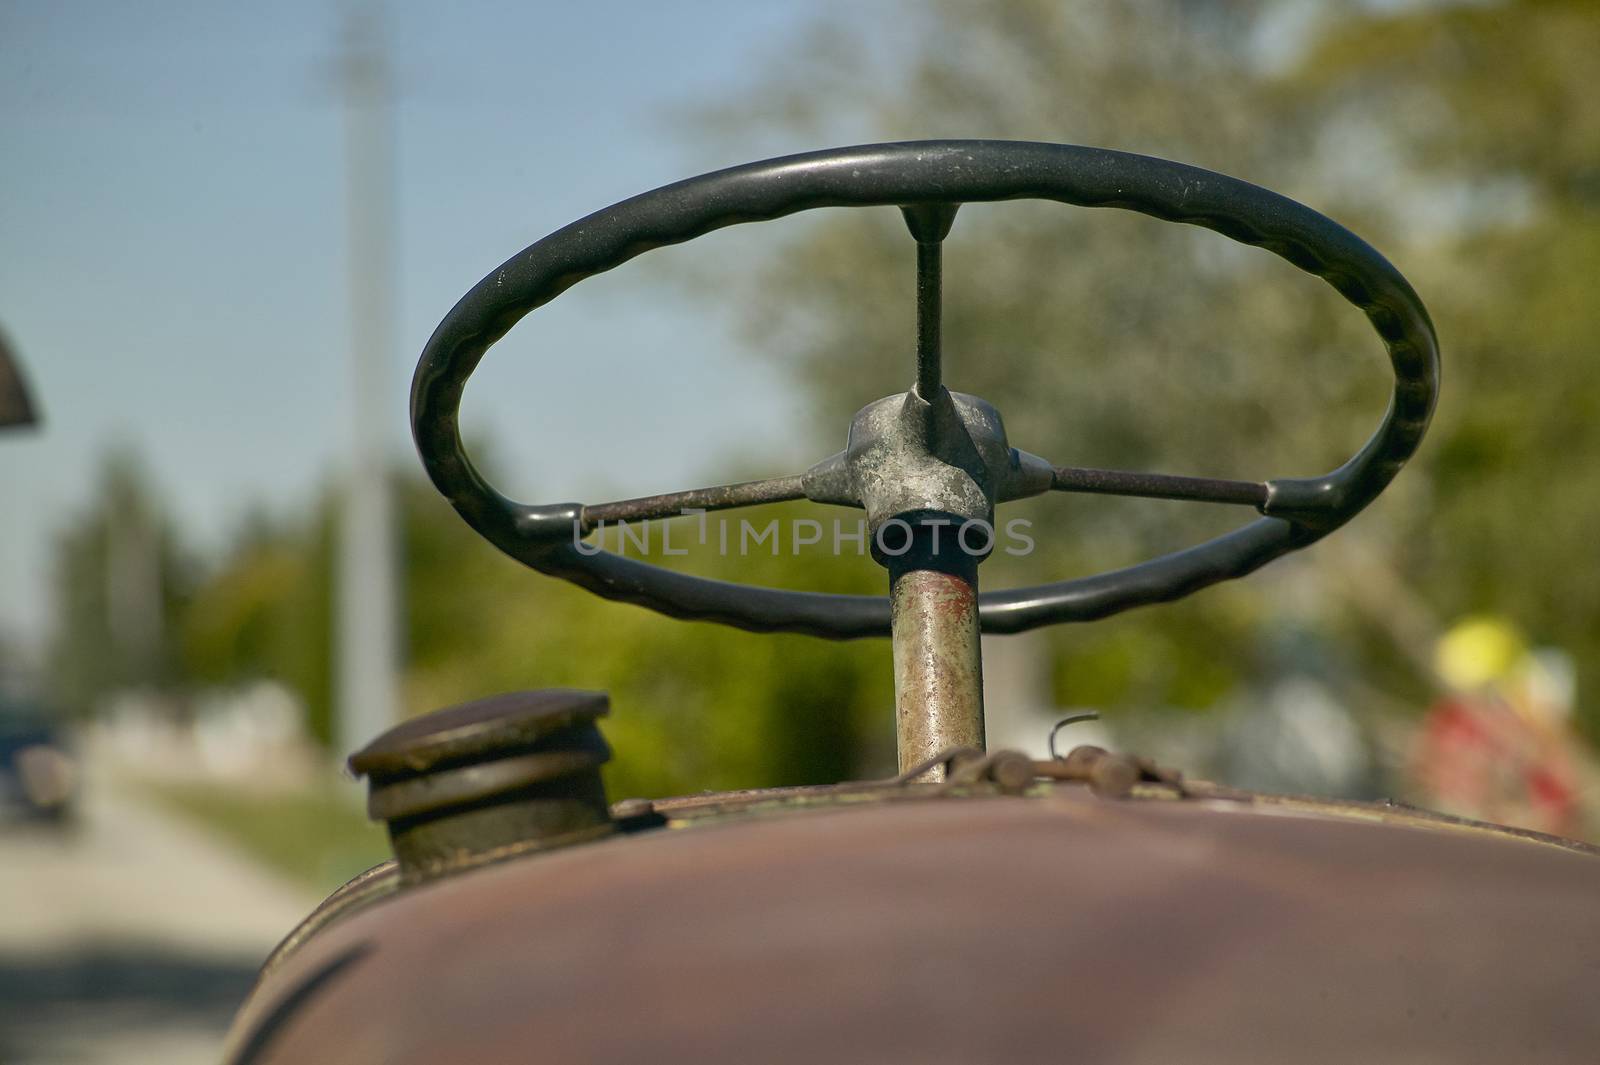 Details of the steering wheel and instrumentation of an old farm tractor nestled in the countryside during a work day.